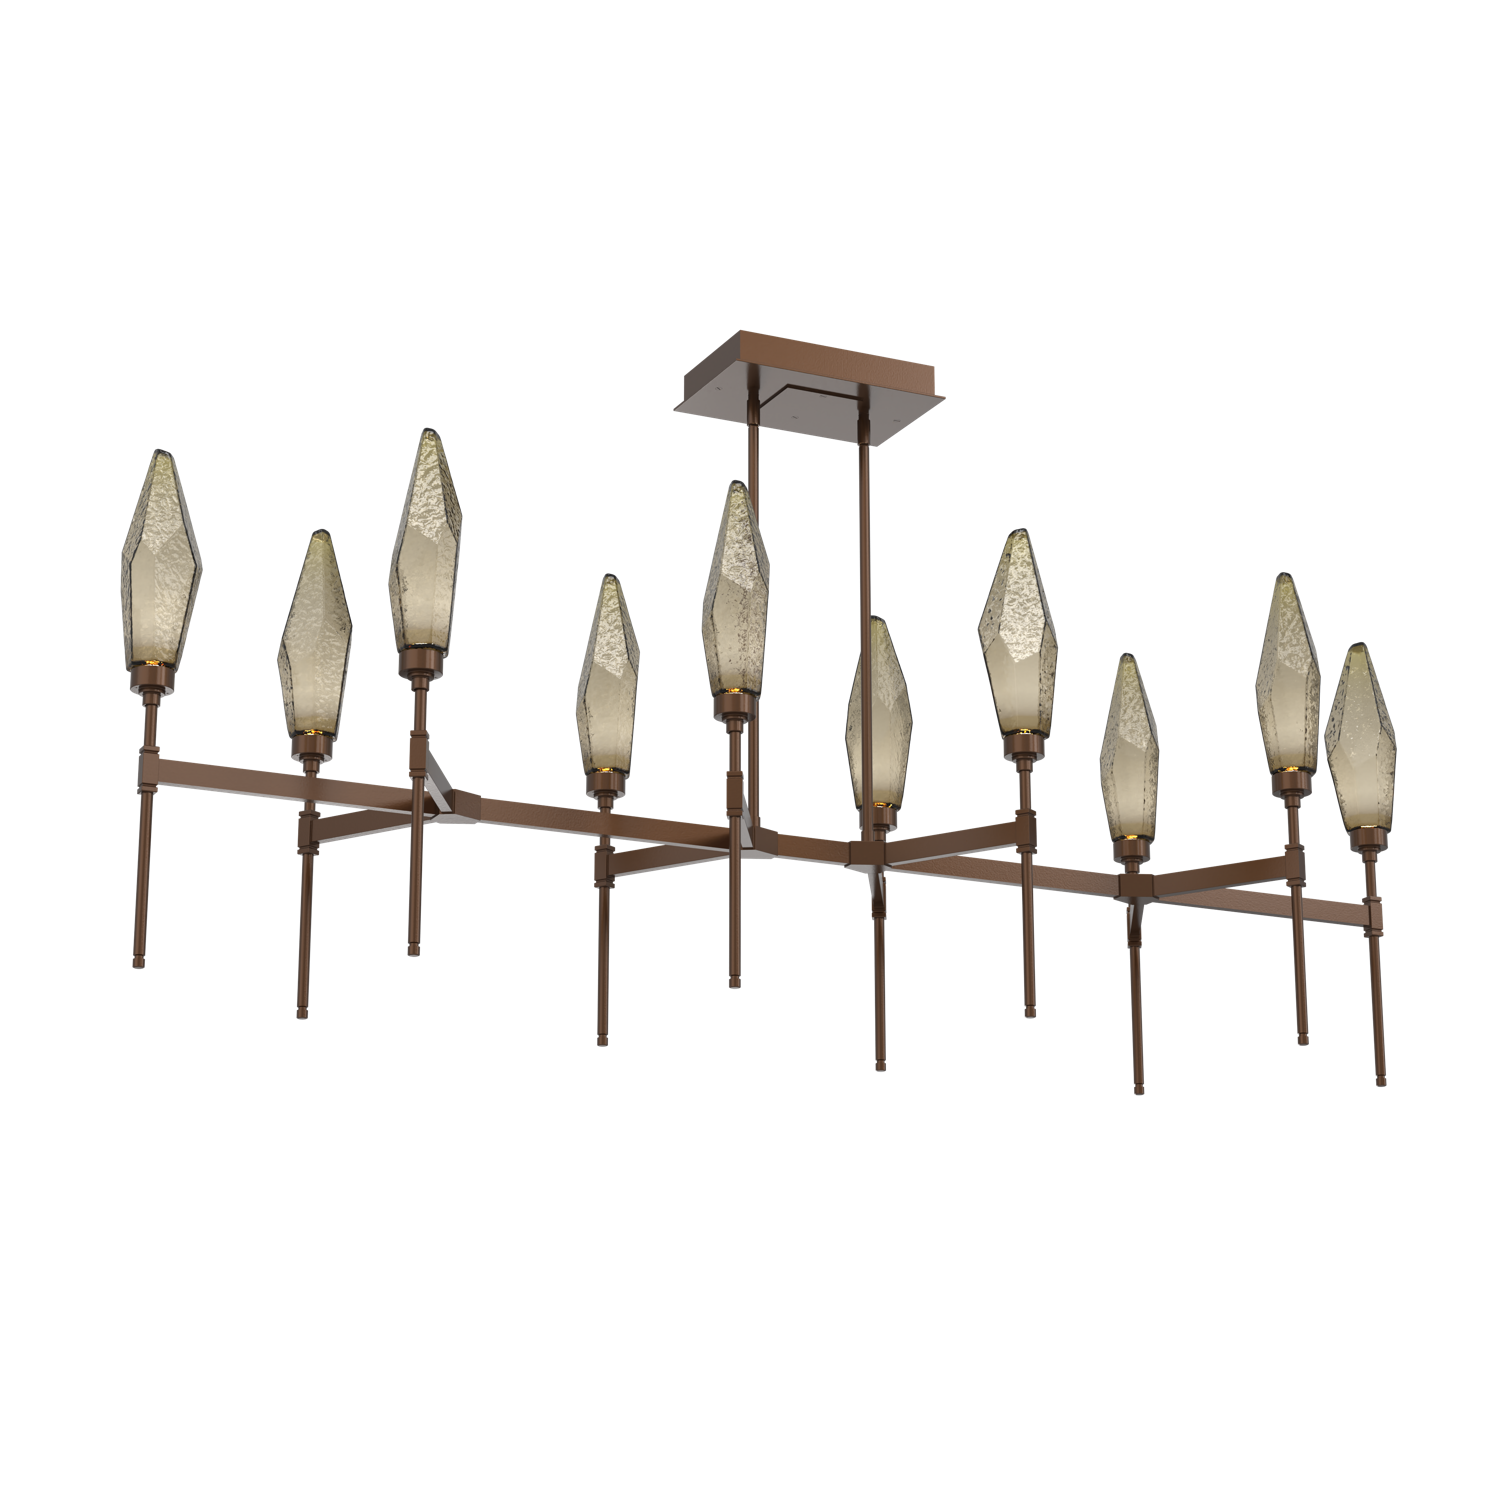 PLB0050-67-BB-CB-Hammerton-Studio-Rock-Crystal-67-inch-linear-belvedere-chandelier-with-burnished-bronze-finish-and-chilled-bronze-blown-glass-shades-and-LED-lamping